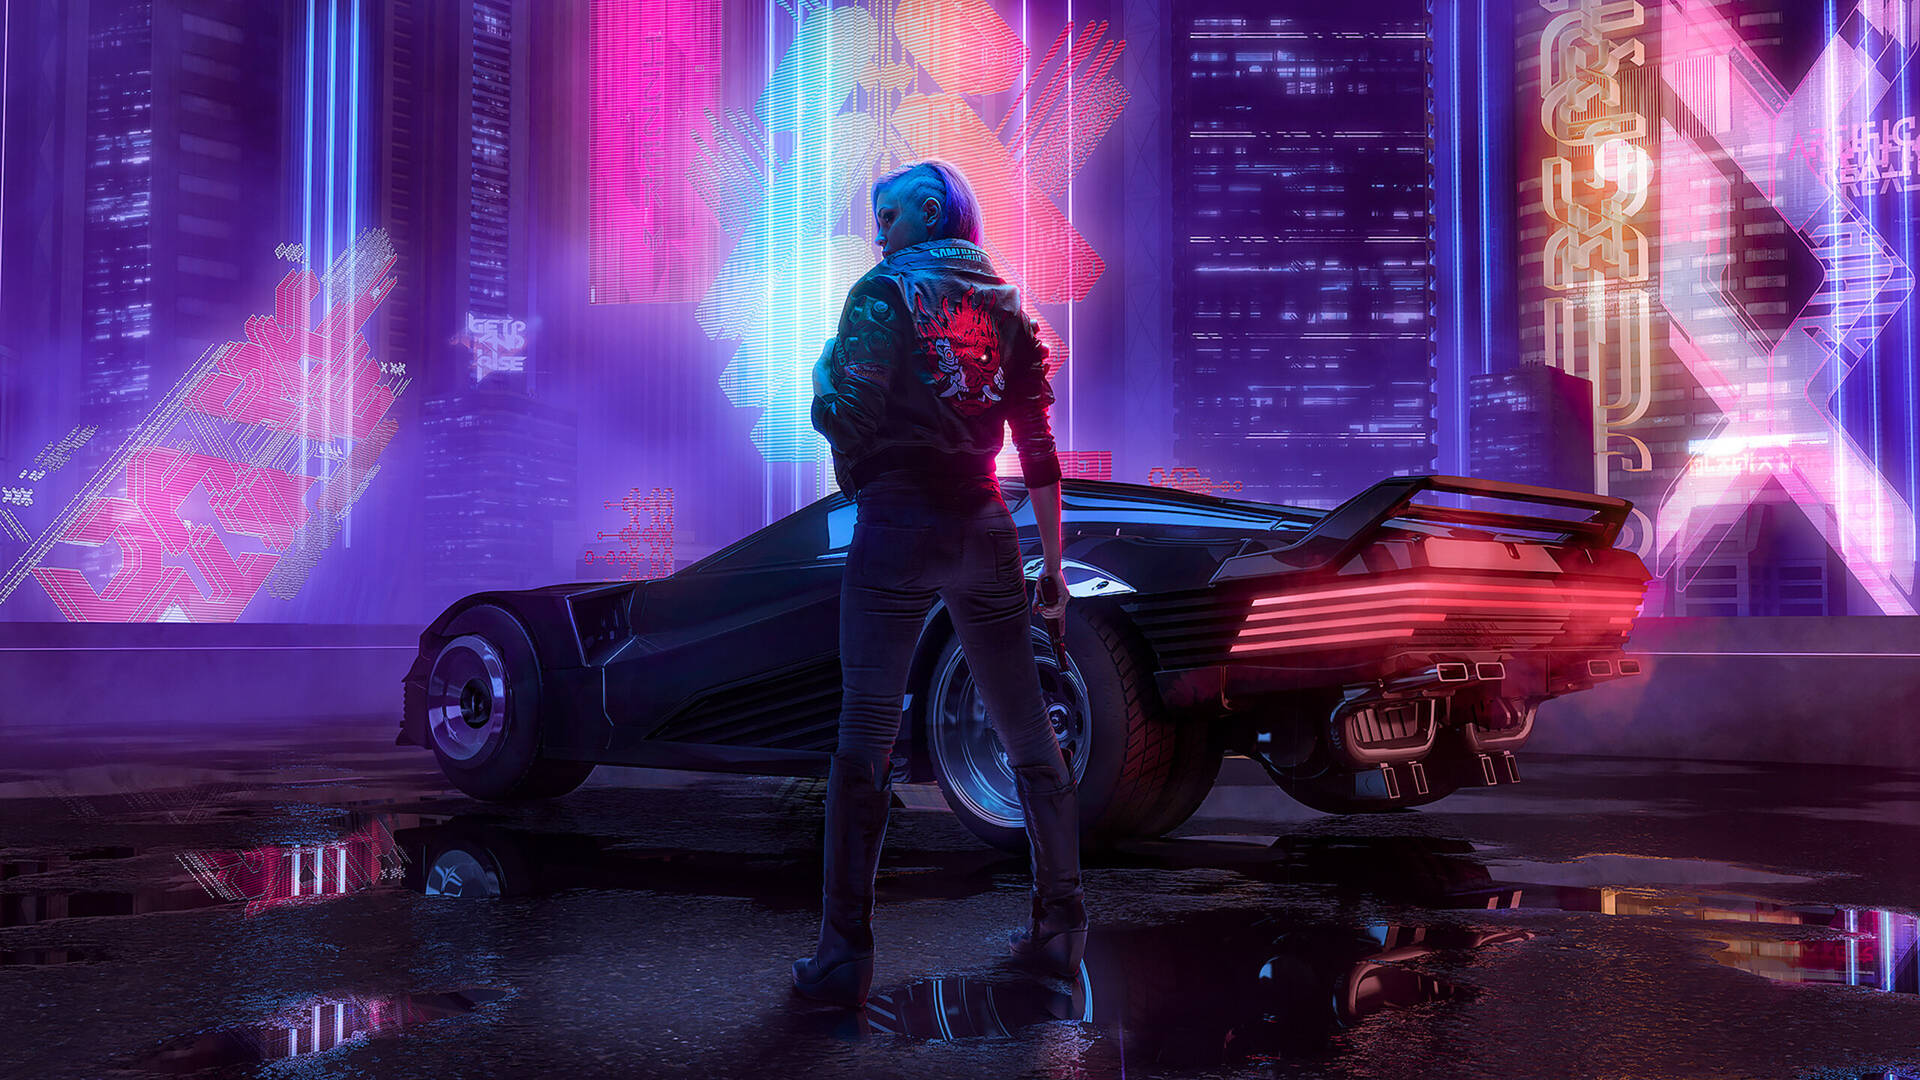 A Man Standing In Front Of A Car In A City Wallpaper